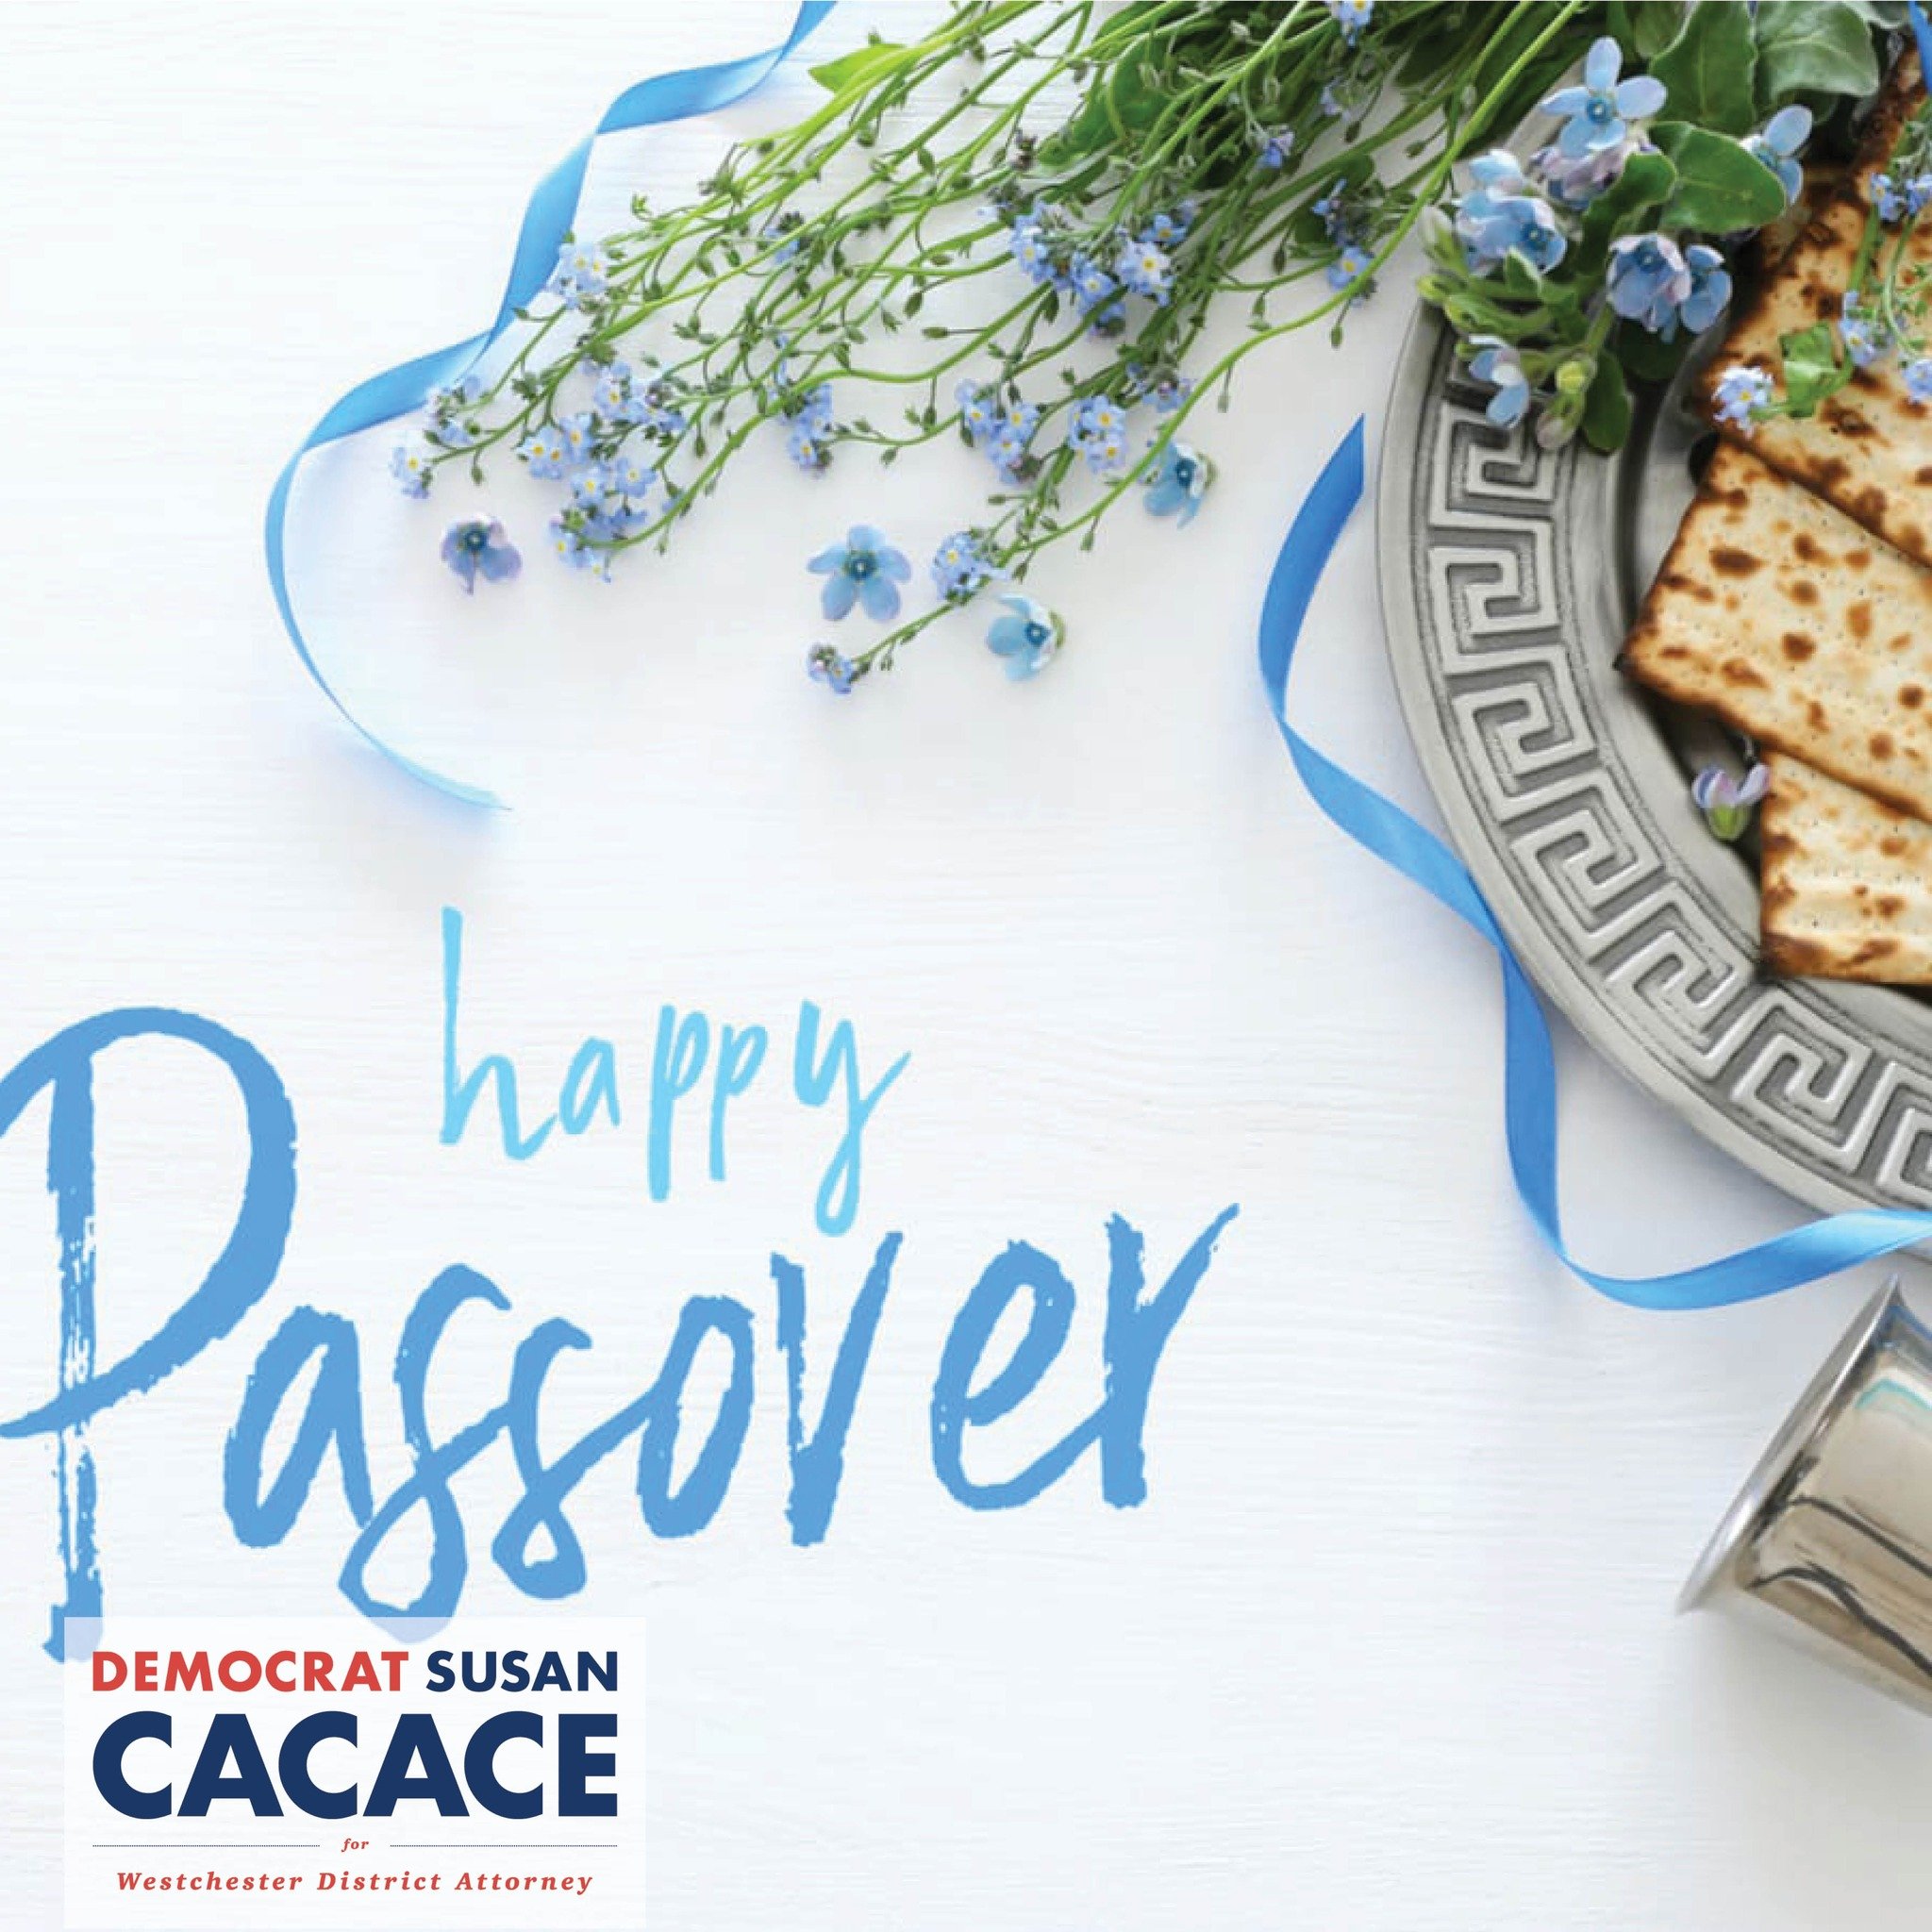 Wishing a happy Passover to all who celebrate. Chag Sameach!

#cacaceforda